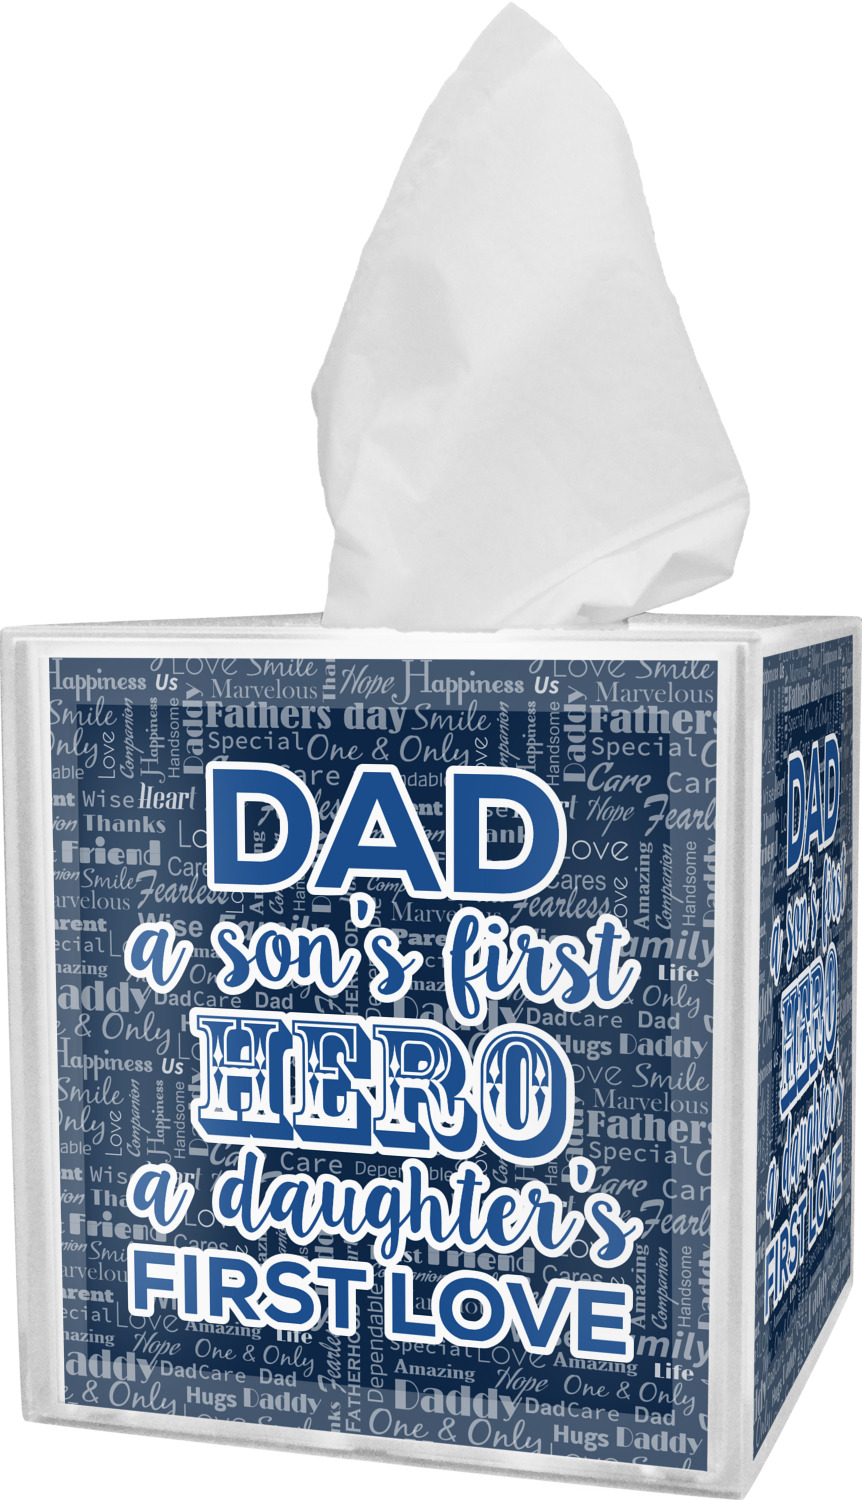 https://www.youcustomizeit.com/common/MAKE/639091/My-Father-My-Hero-Tissue-Box-Cover-Personalized.jpg?lm=1686088040